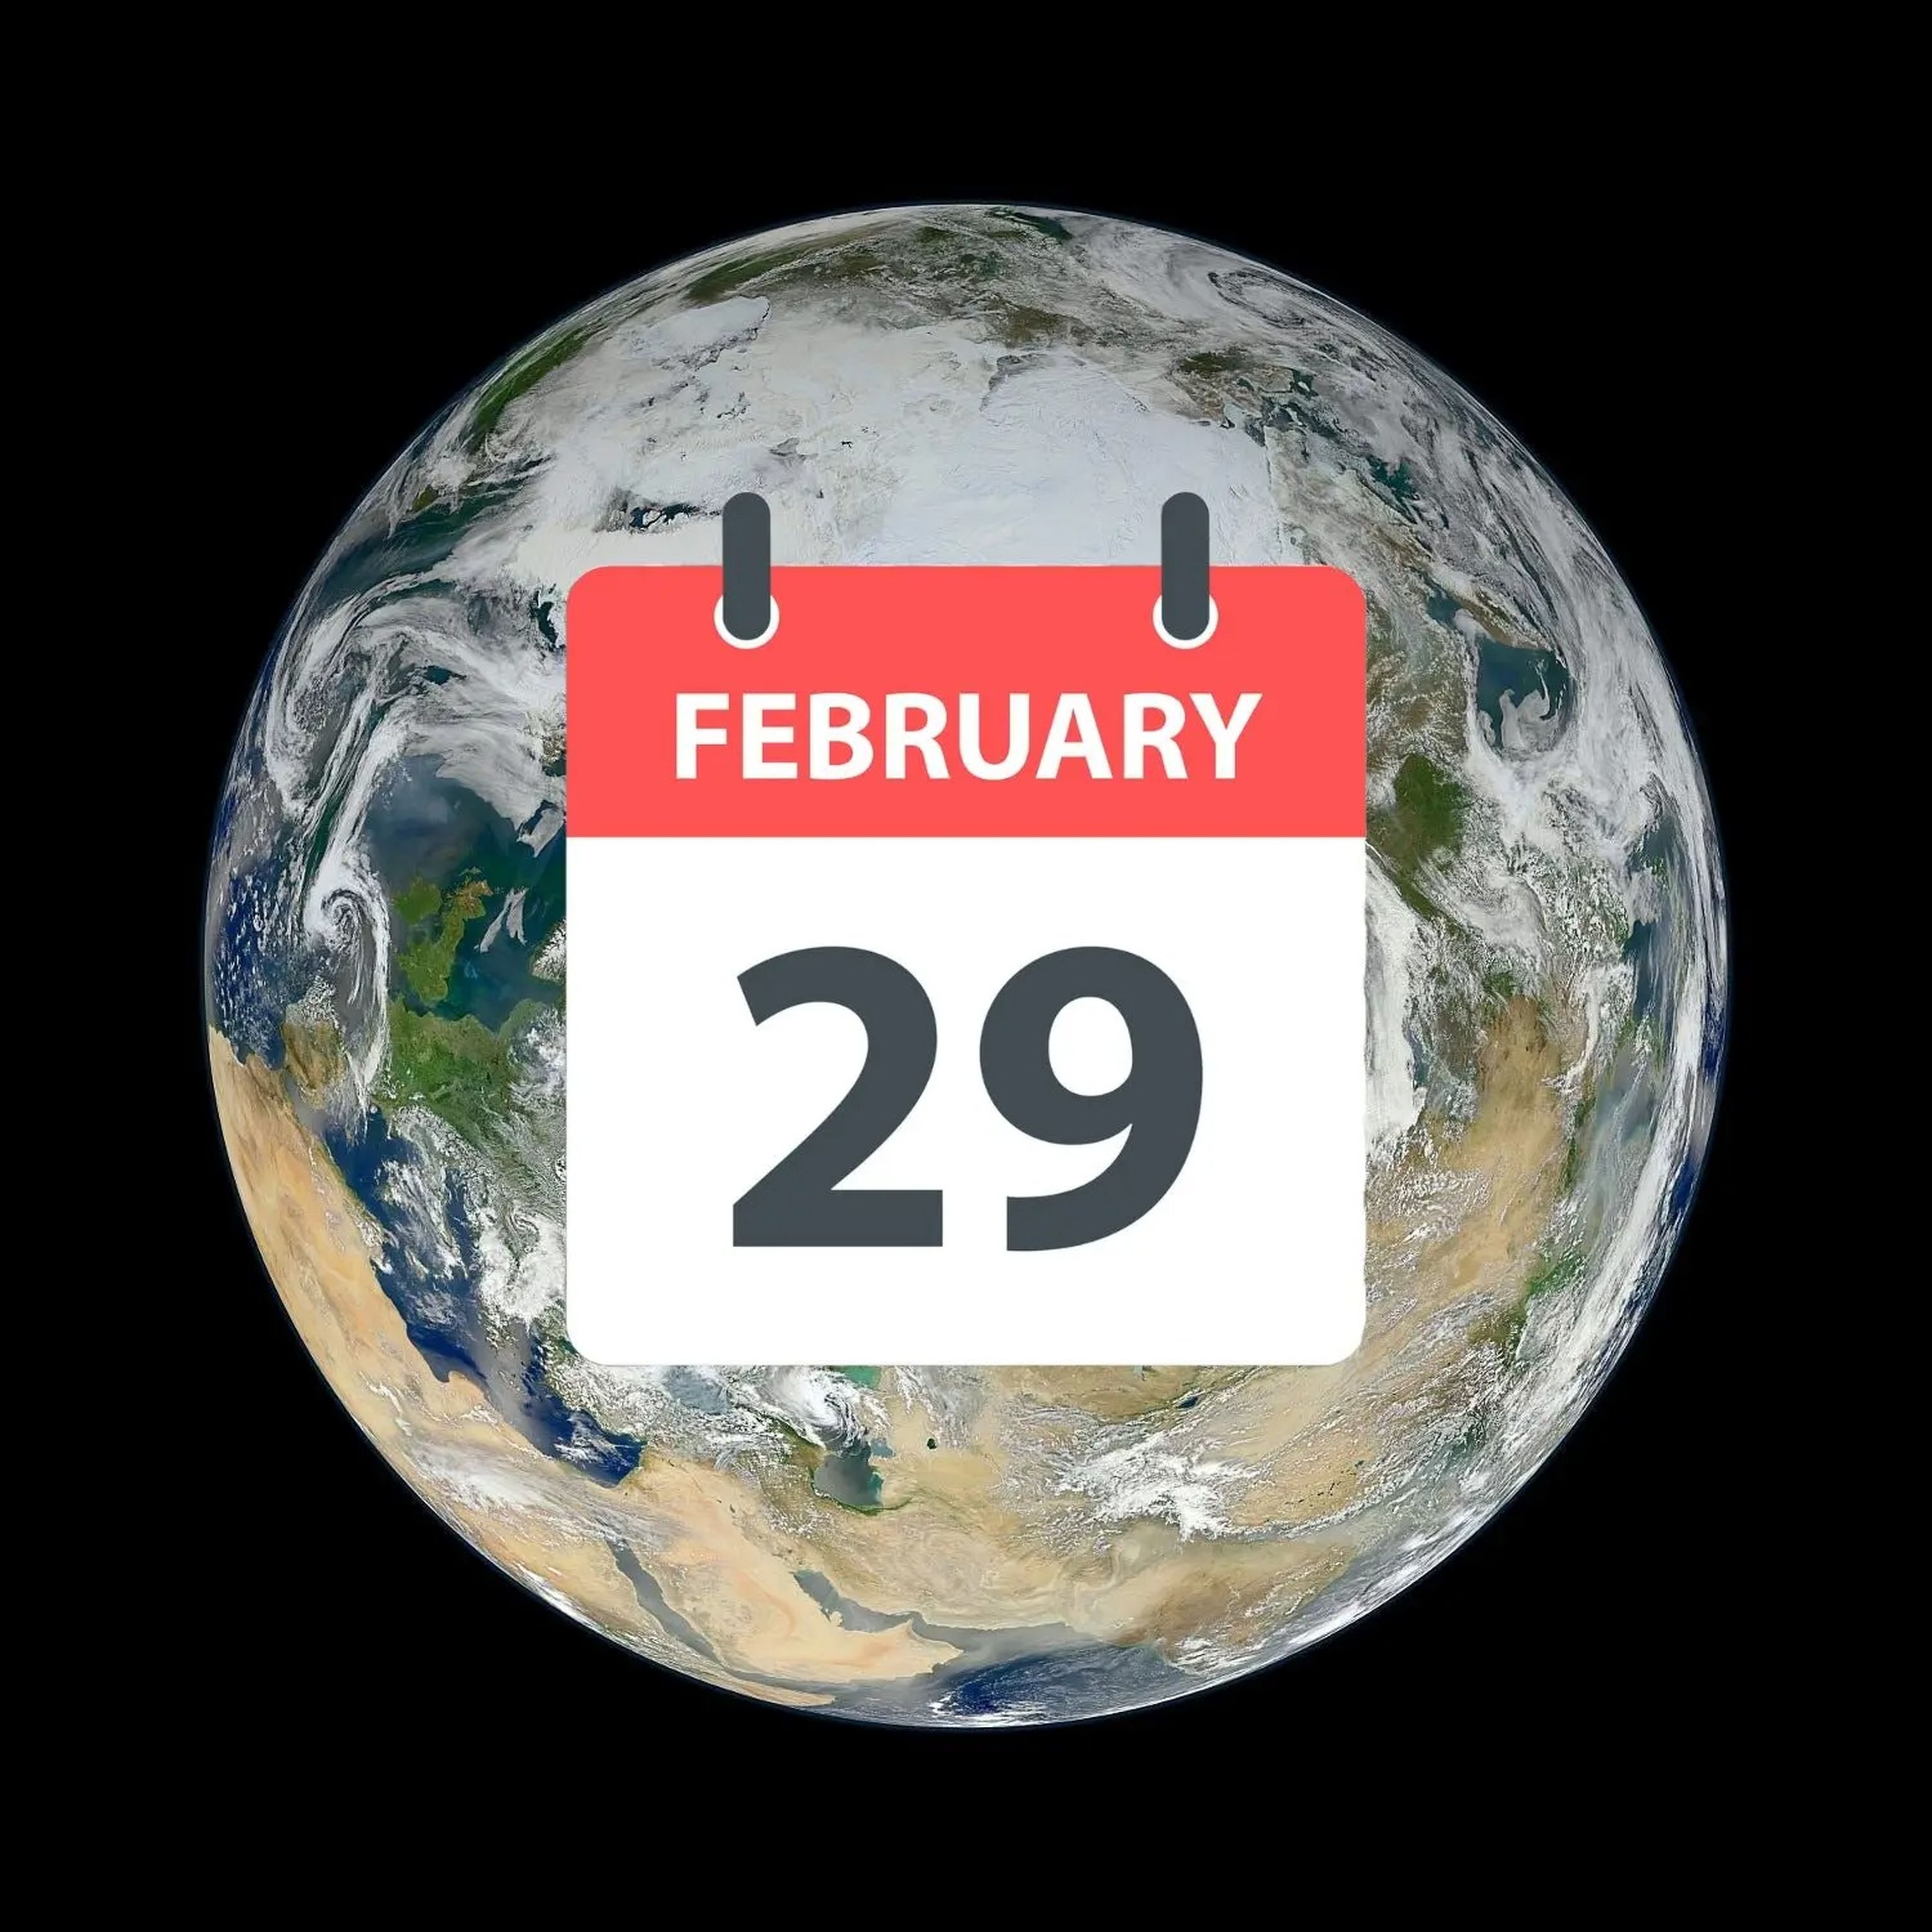 earth in space with swirling clouds green and brown continents overlaid with giant calendar illustration showing February 29